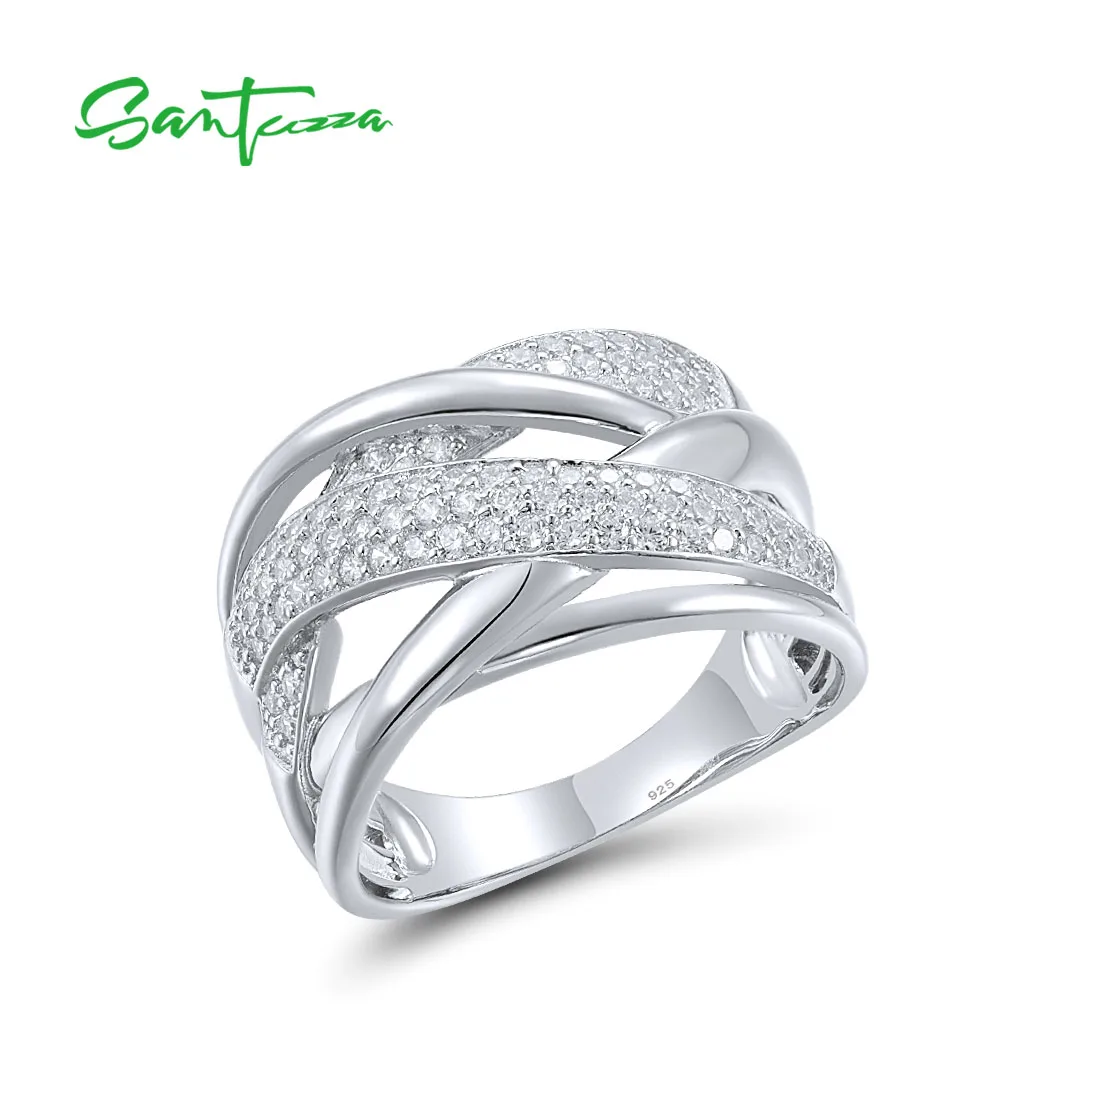 SANTUZZA Genuine 925 Sterling Silver Rings For Women Sparkling White Cubic Zirconia Charming Gorgeous Modern Fine Chic Jewelry